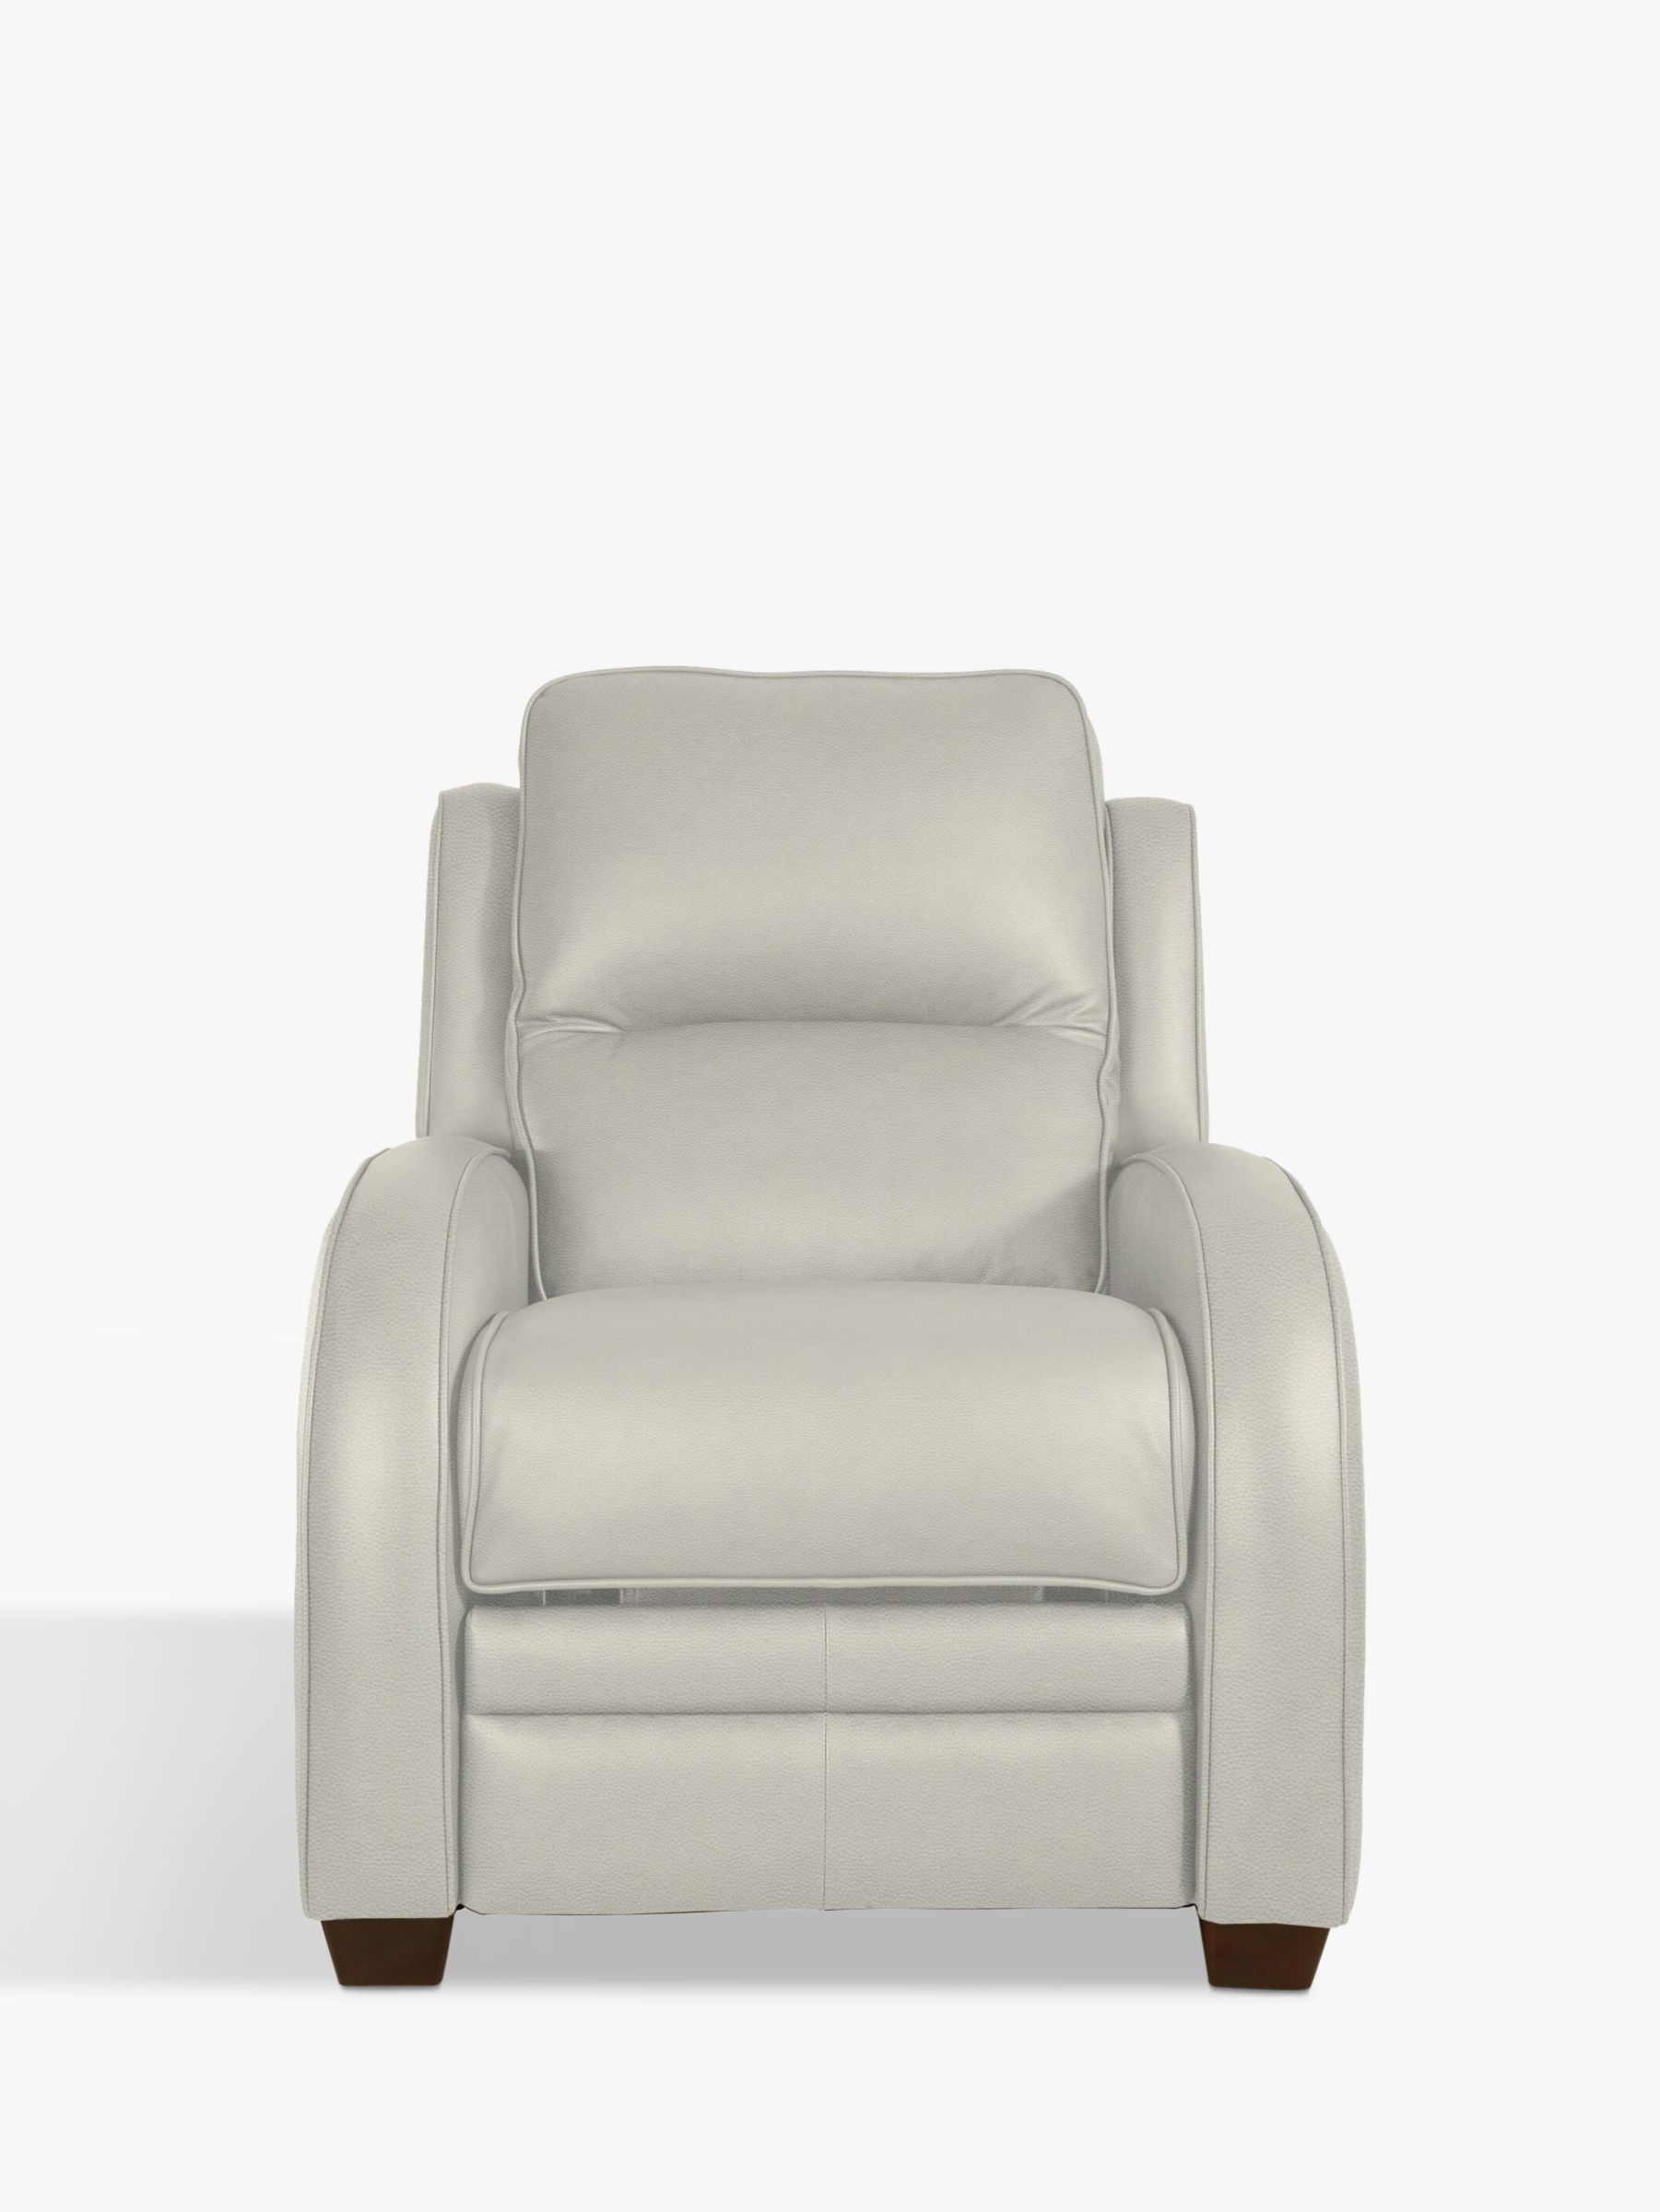 Parker Knoll Charleston Leather Power, Taupe Leather Chair